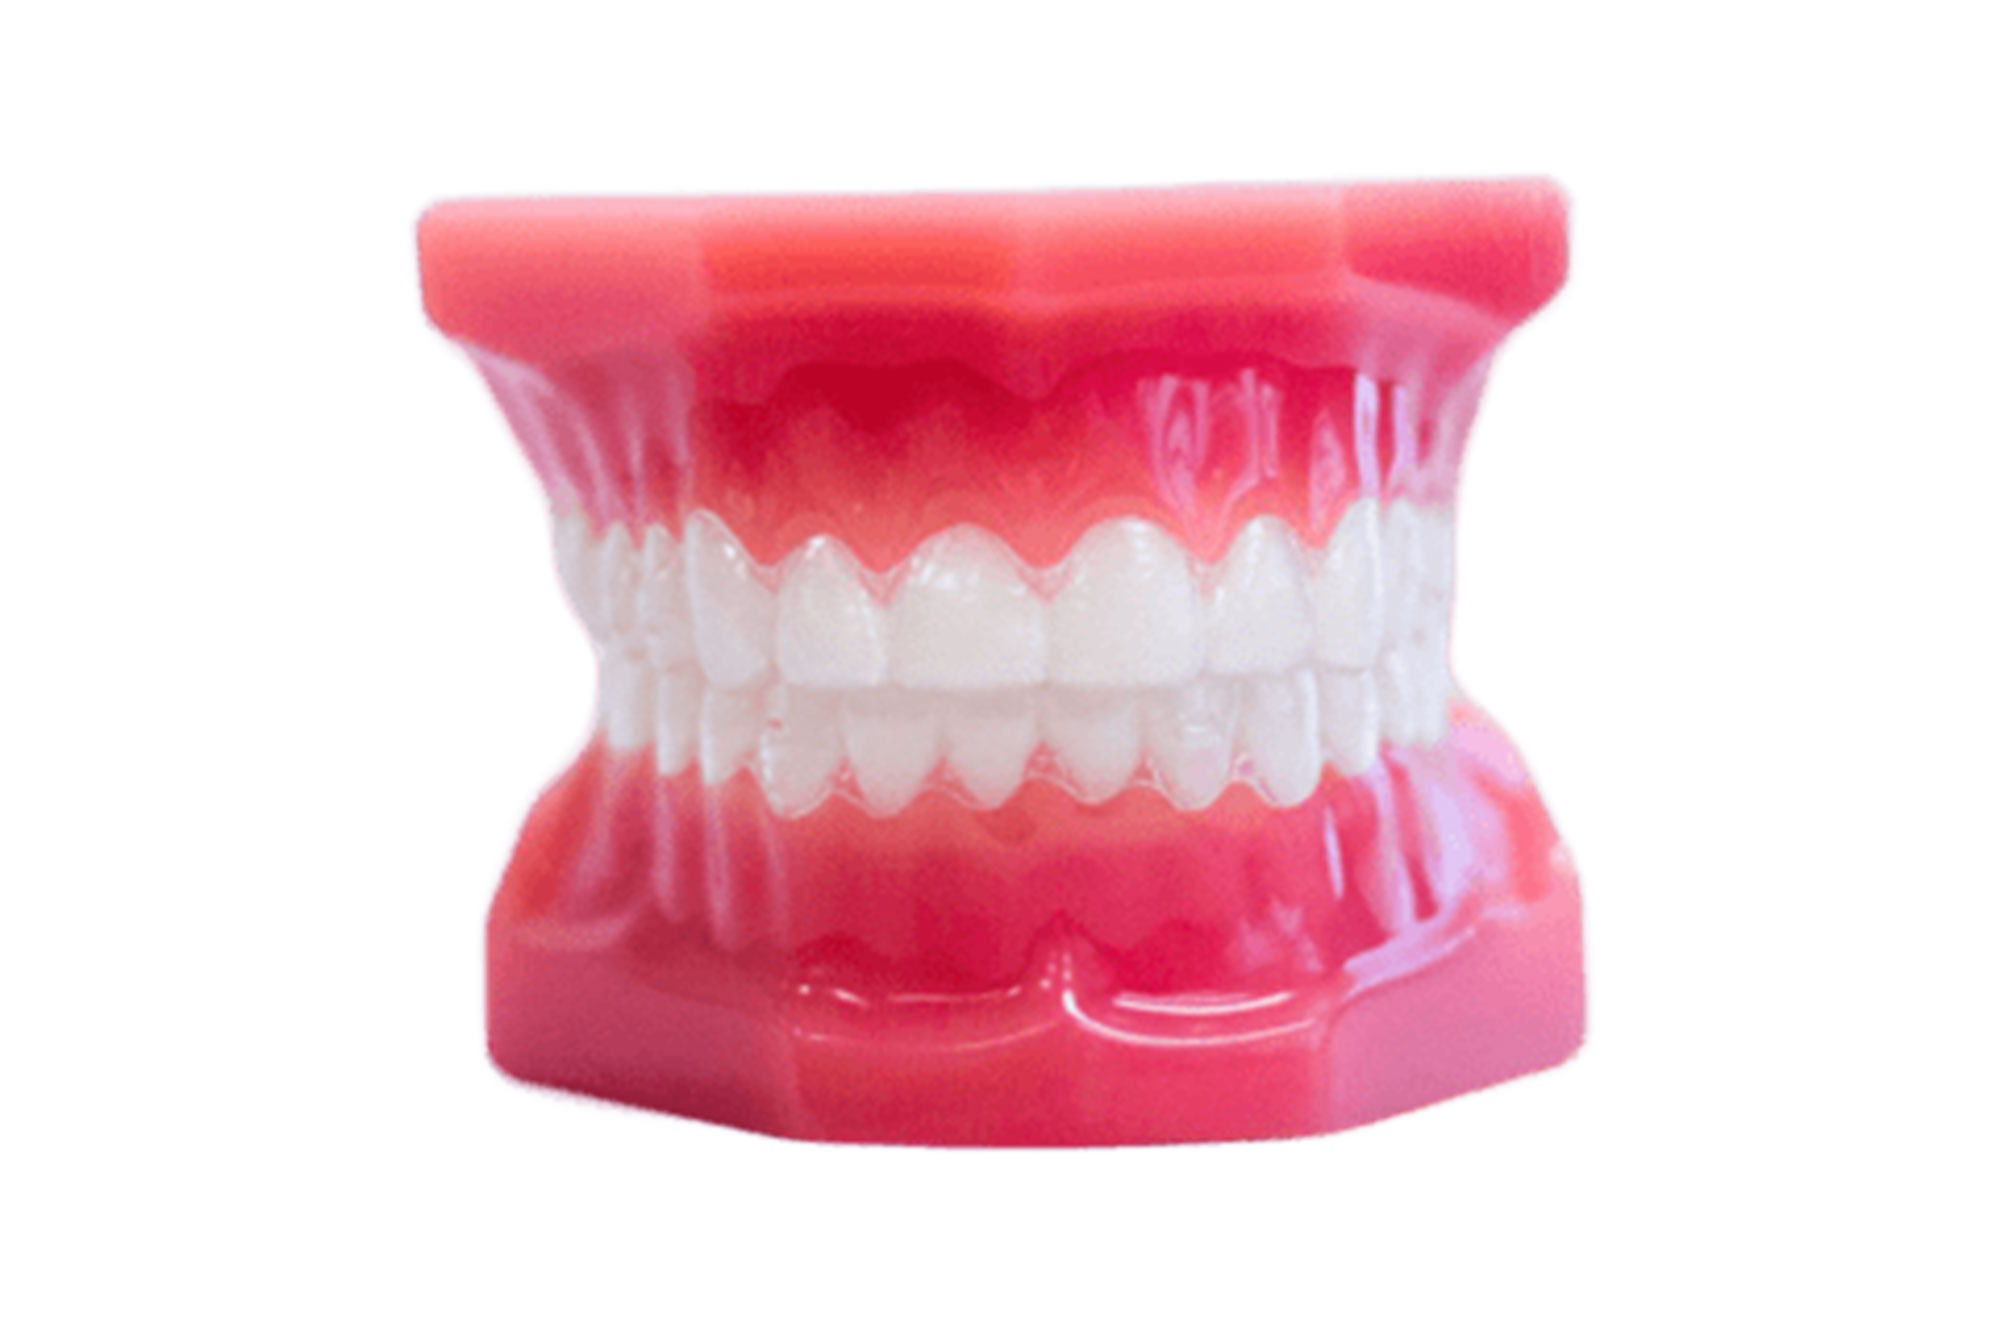 clear aligners image